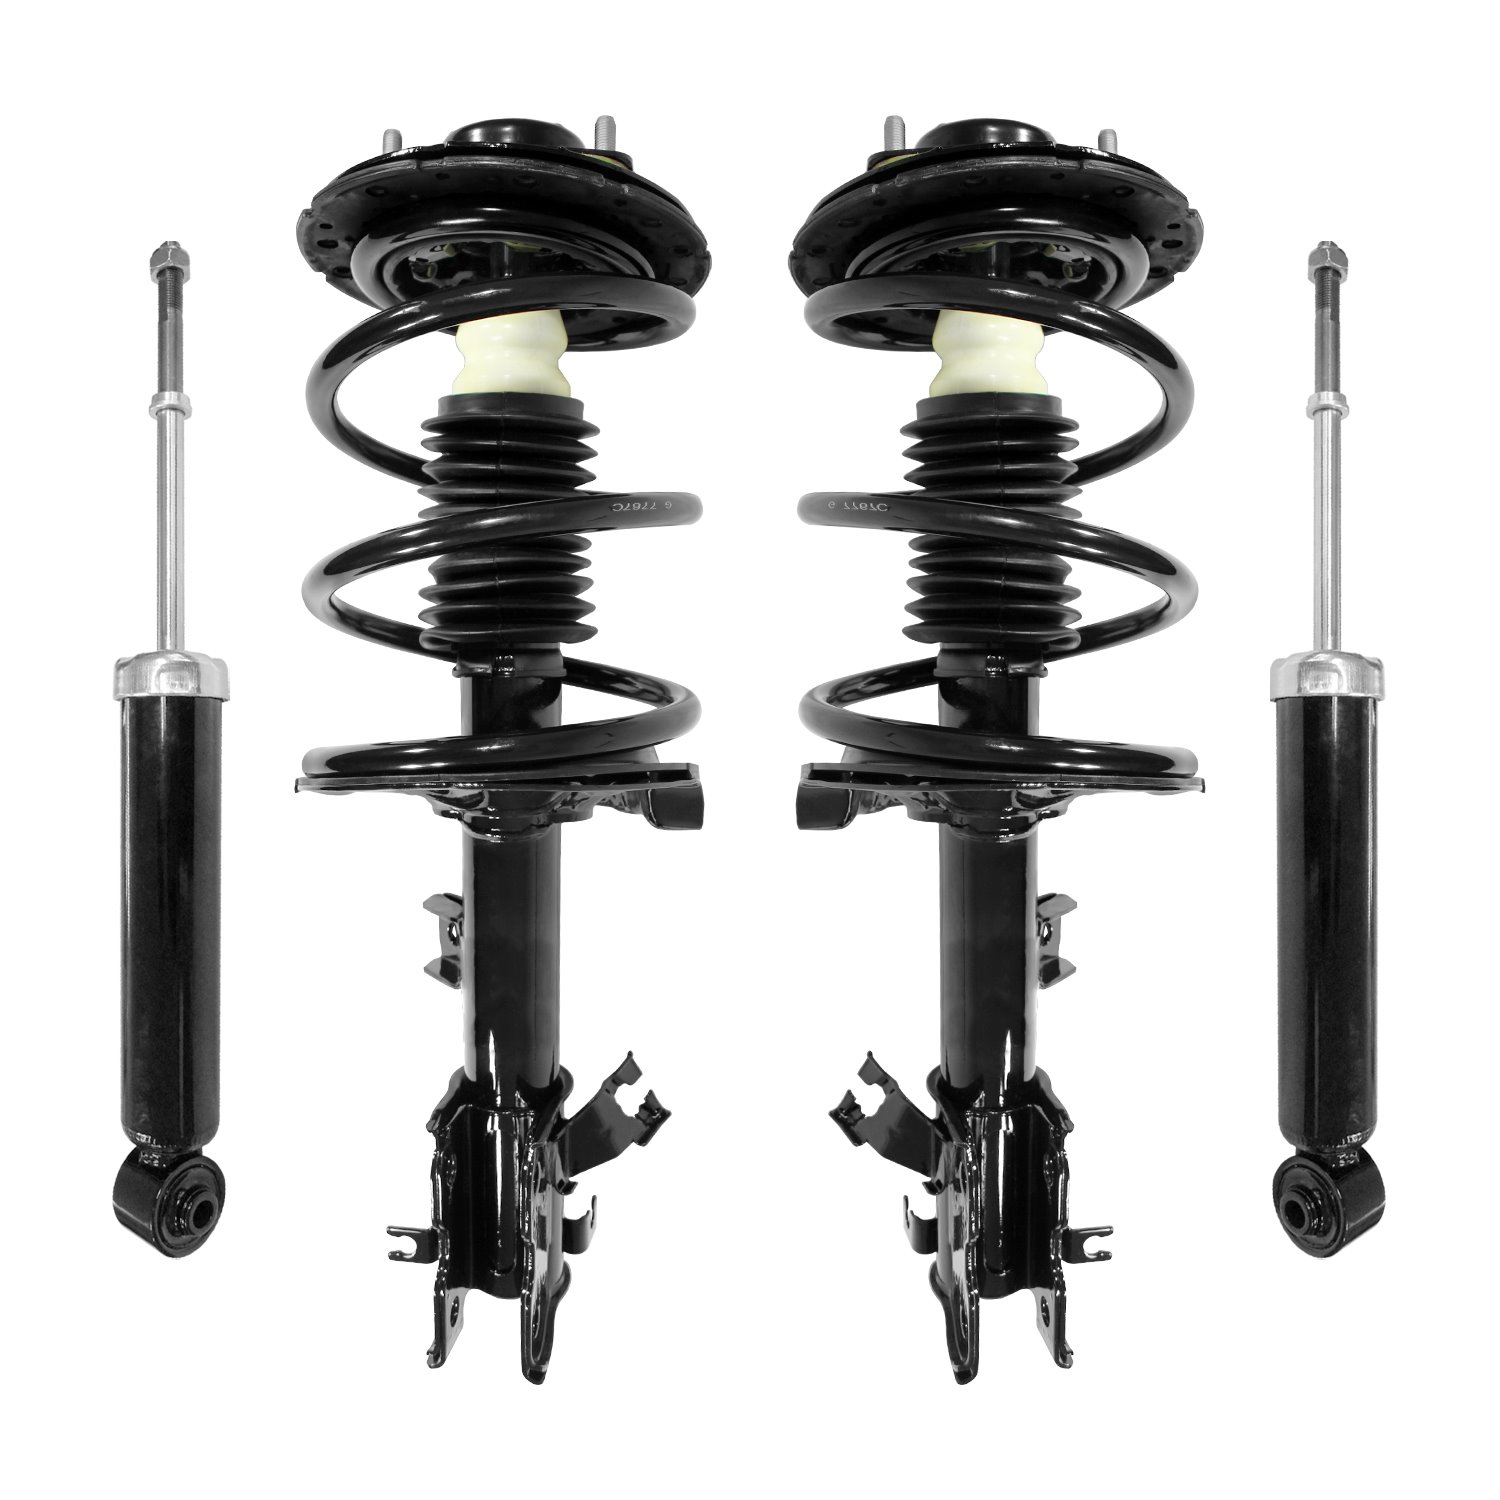 4-11475-255610-001 Front & Rear Suspension Strut & Coil Spring Assembly Fits Select Nissan Quest